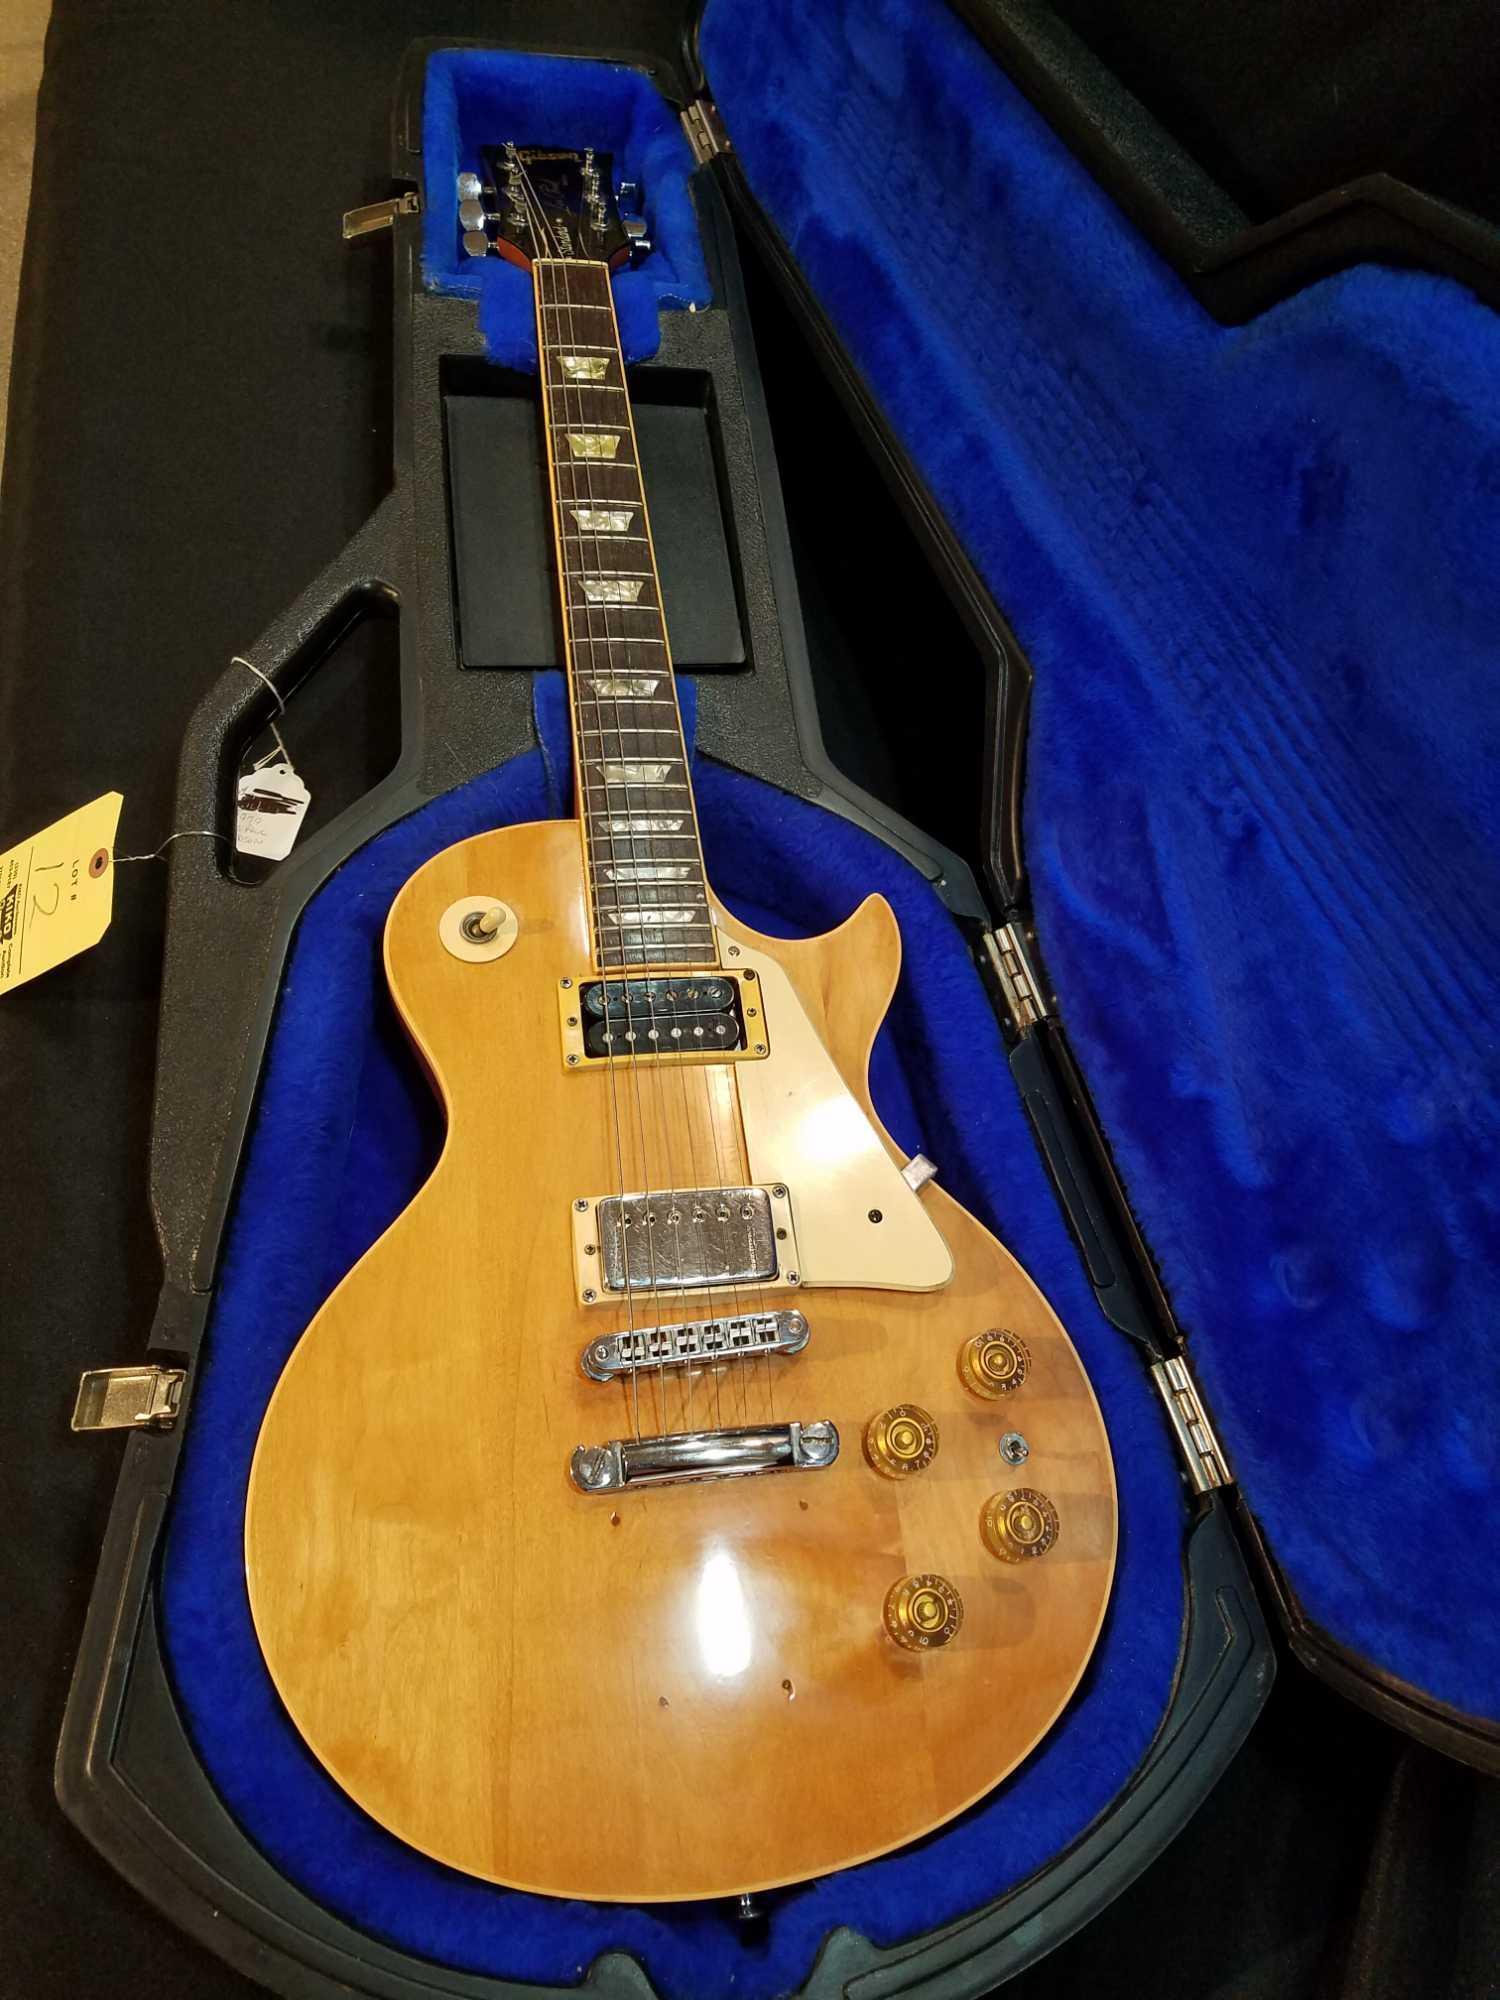 1979 Gibson Les Paul standard model guitar with newer case